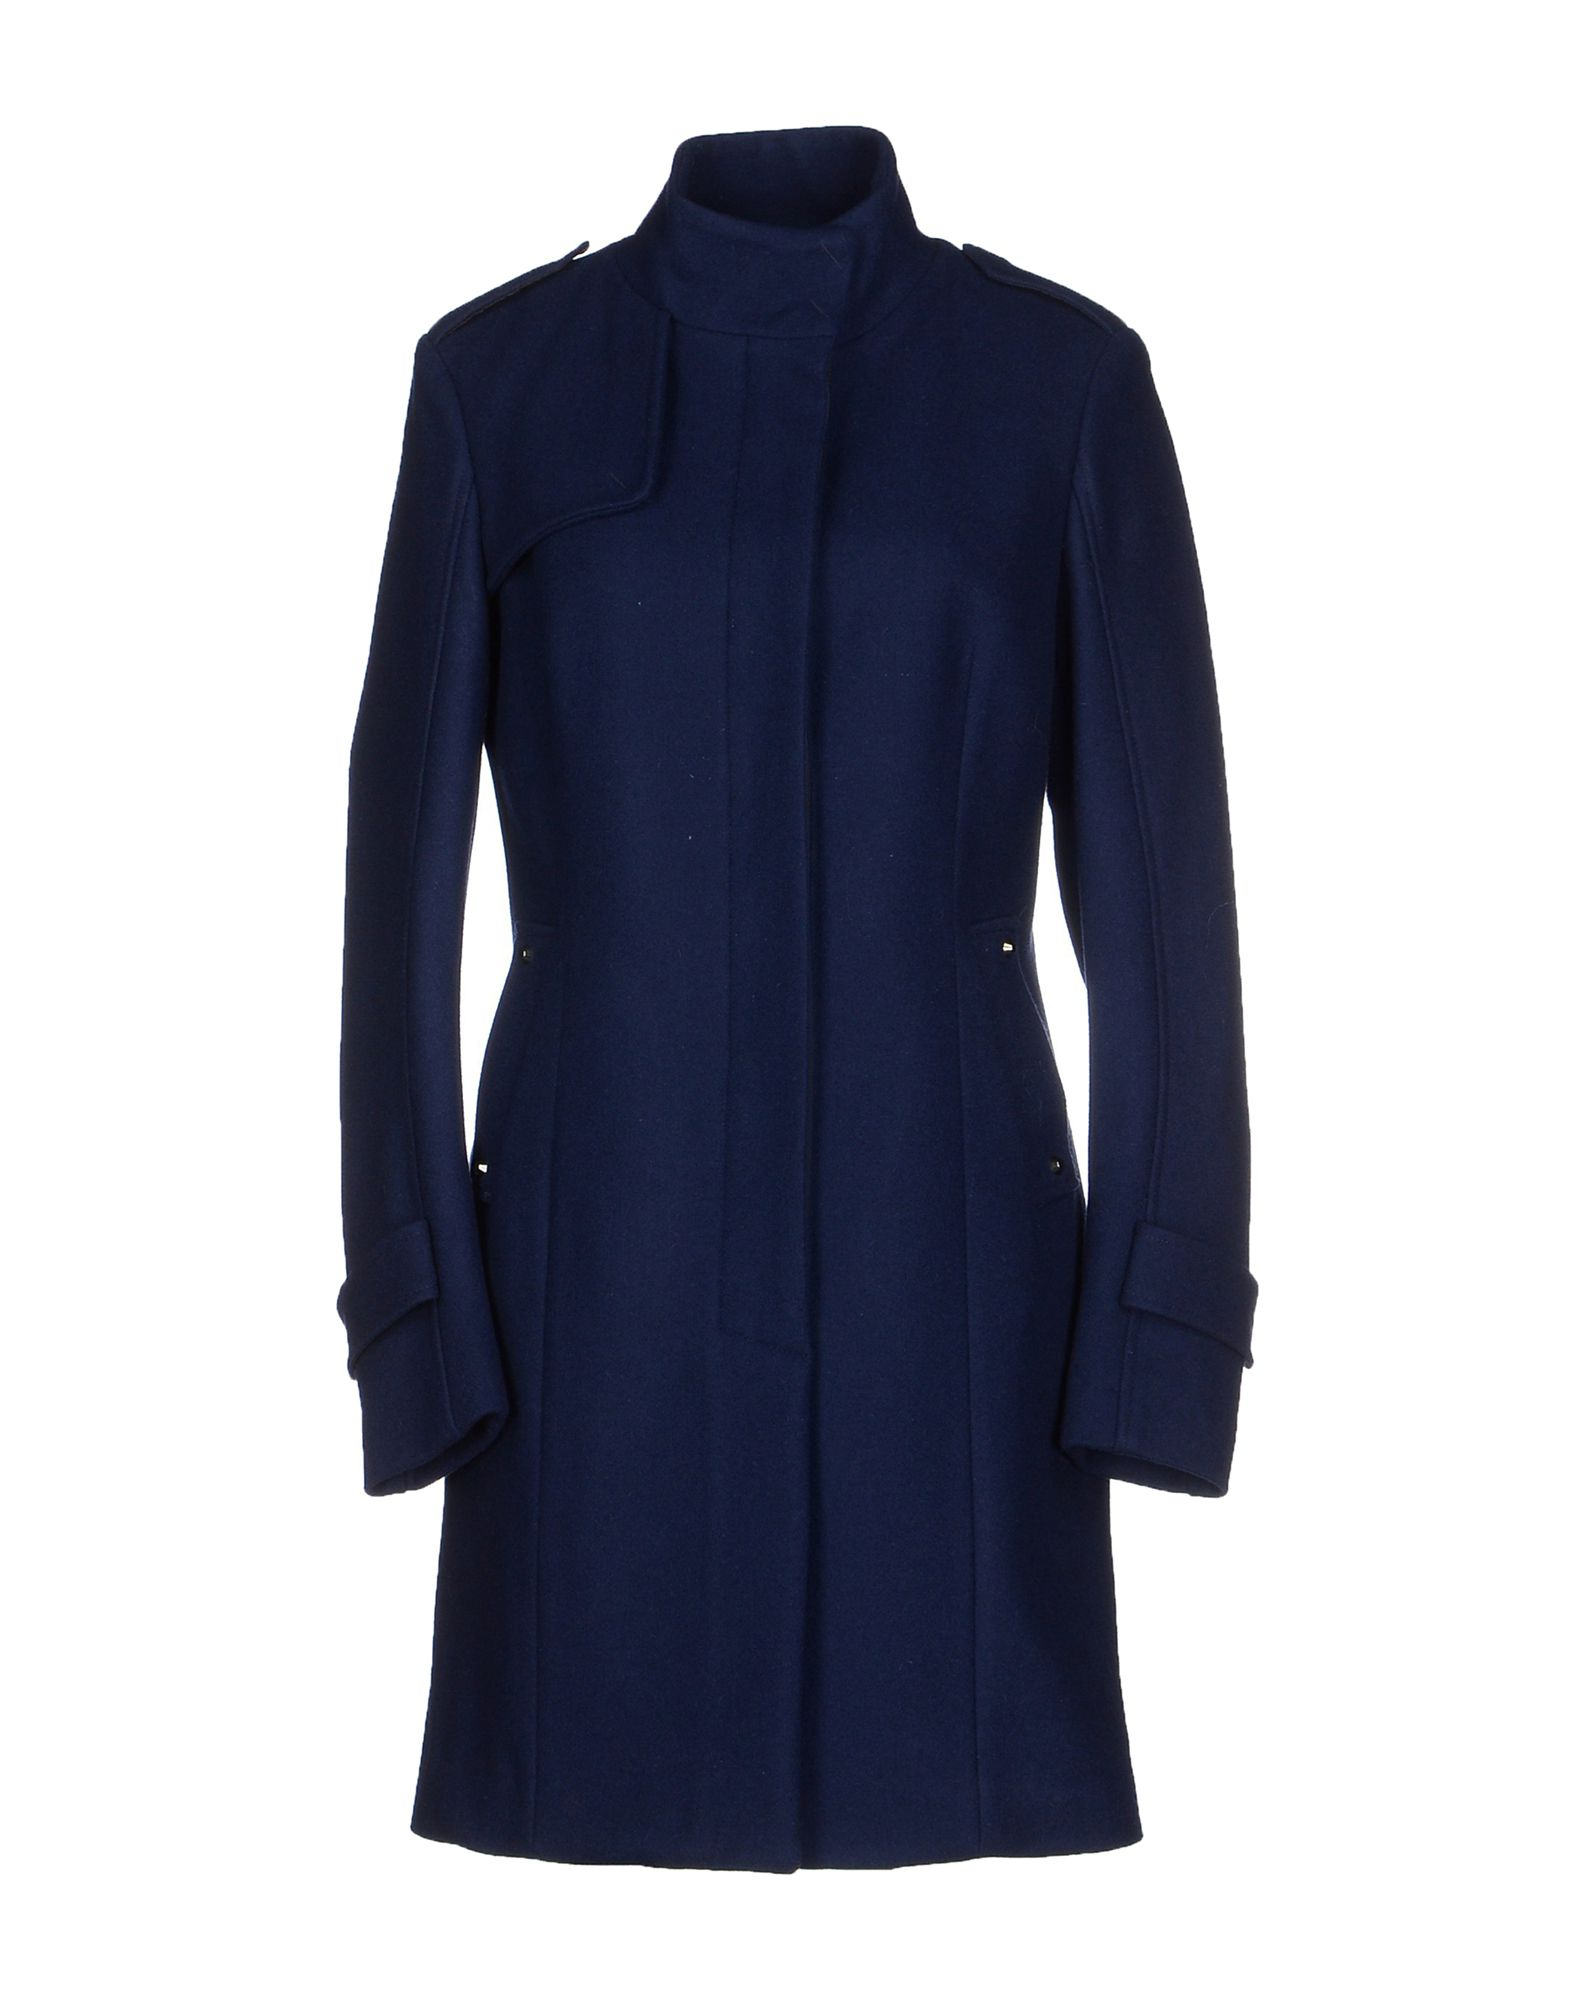 Lyst - Costume National Coat in Blue